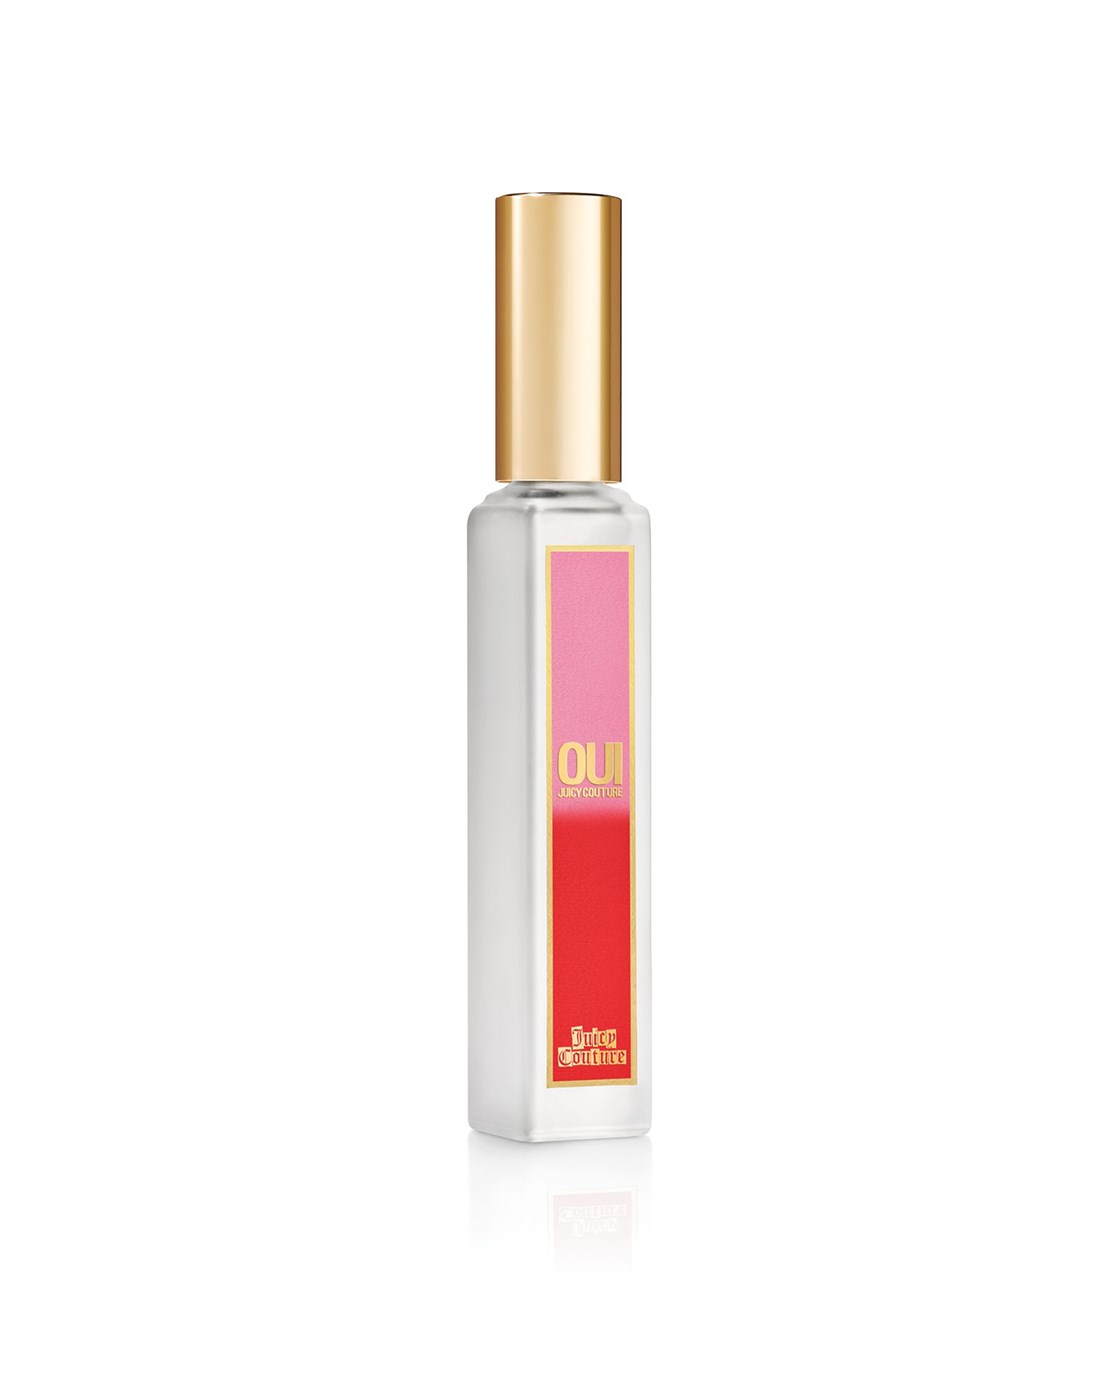 Juicy Couture OUI  Rollerball